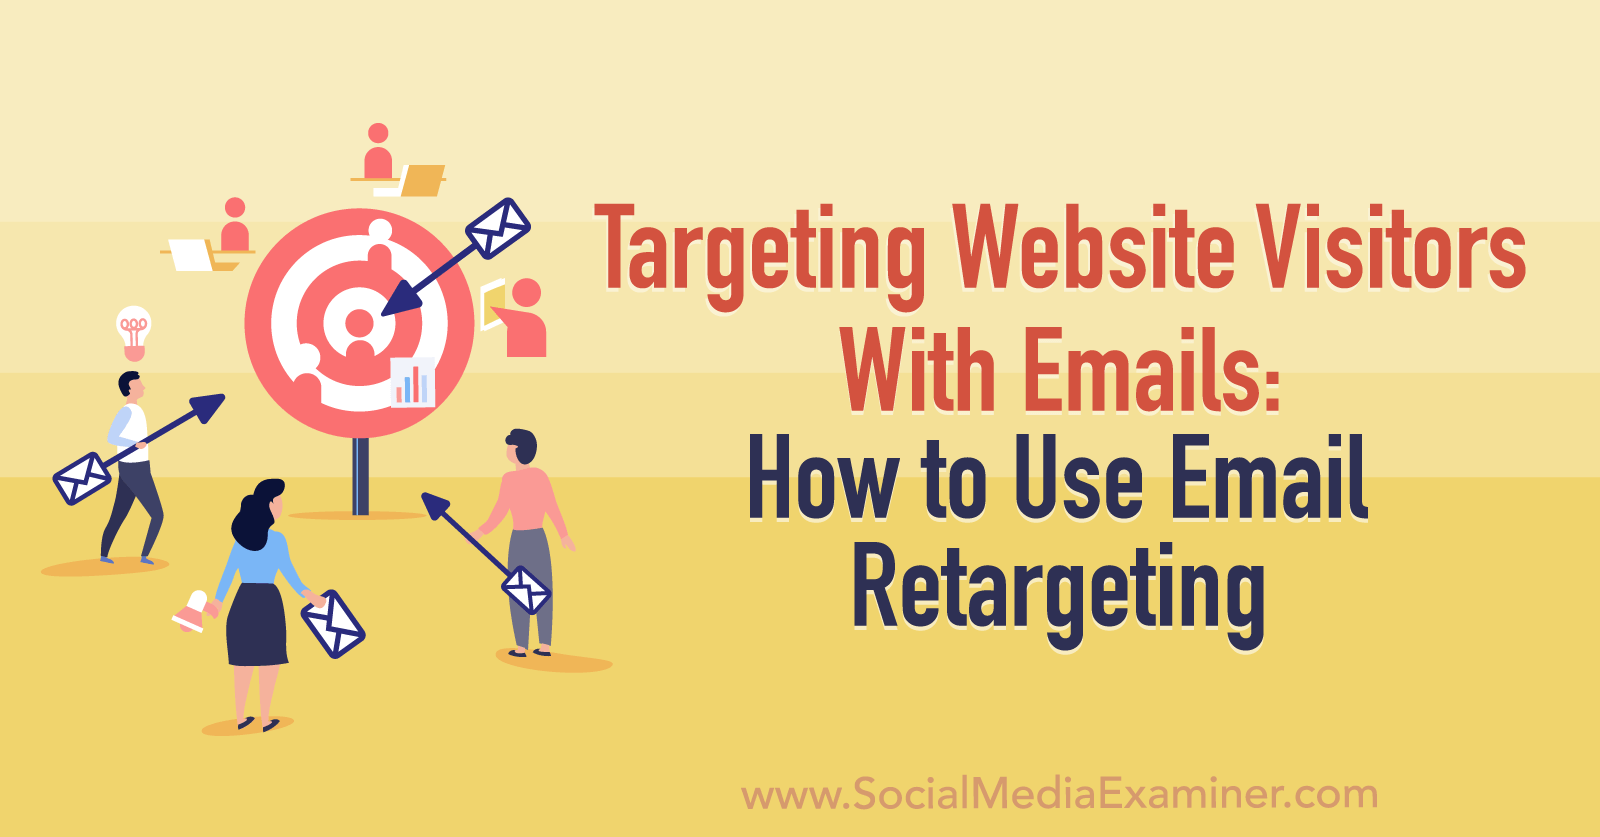 Targeting Website Visitors With Emails: How to Use Email Retargeting by Social Media Examiner